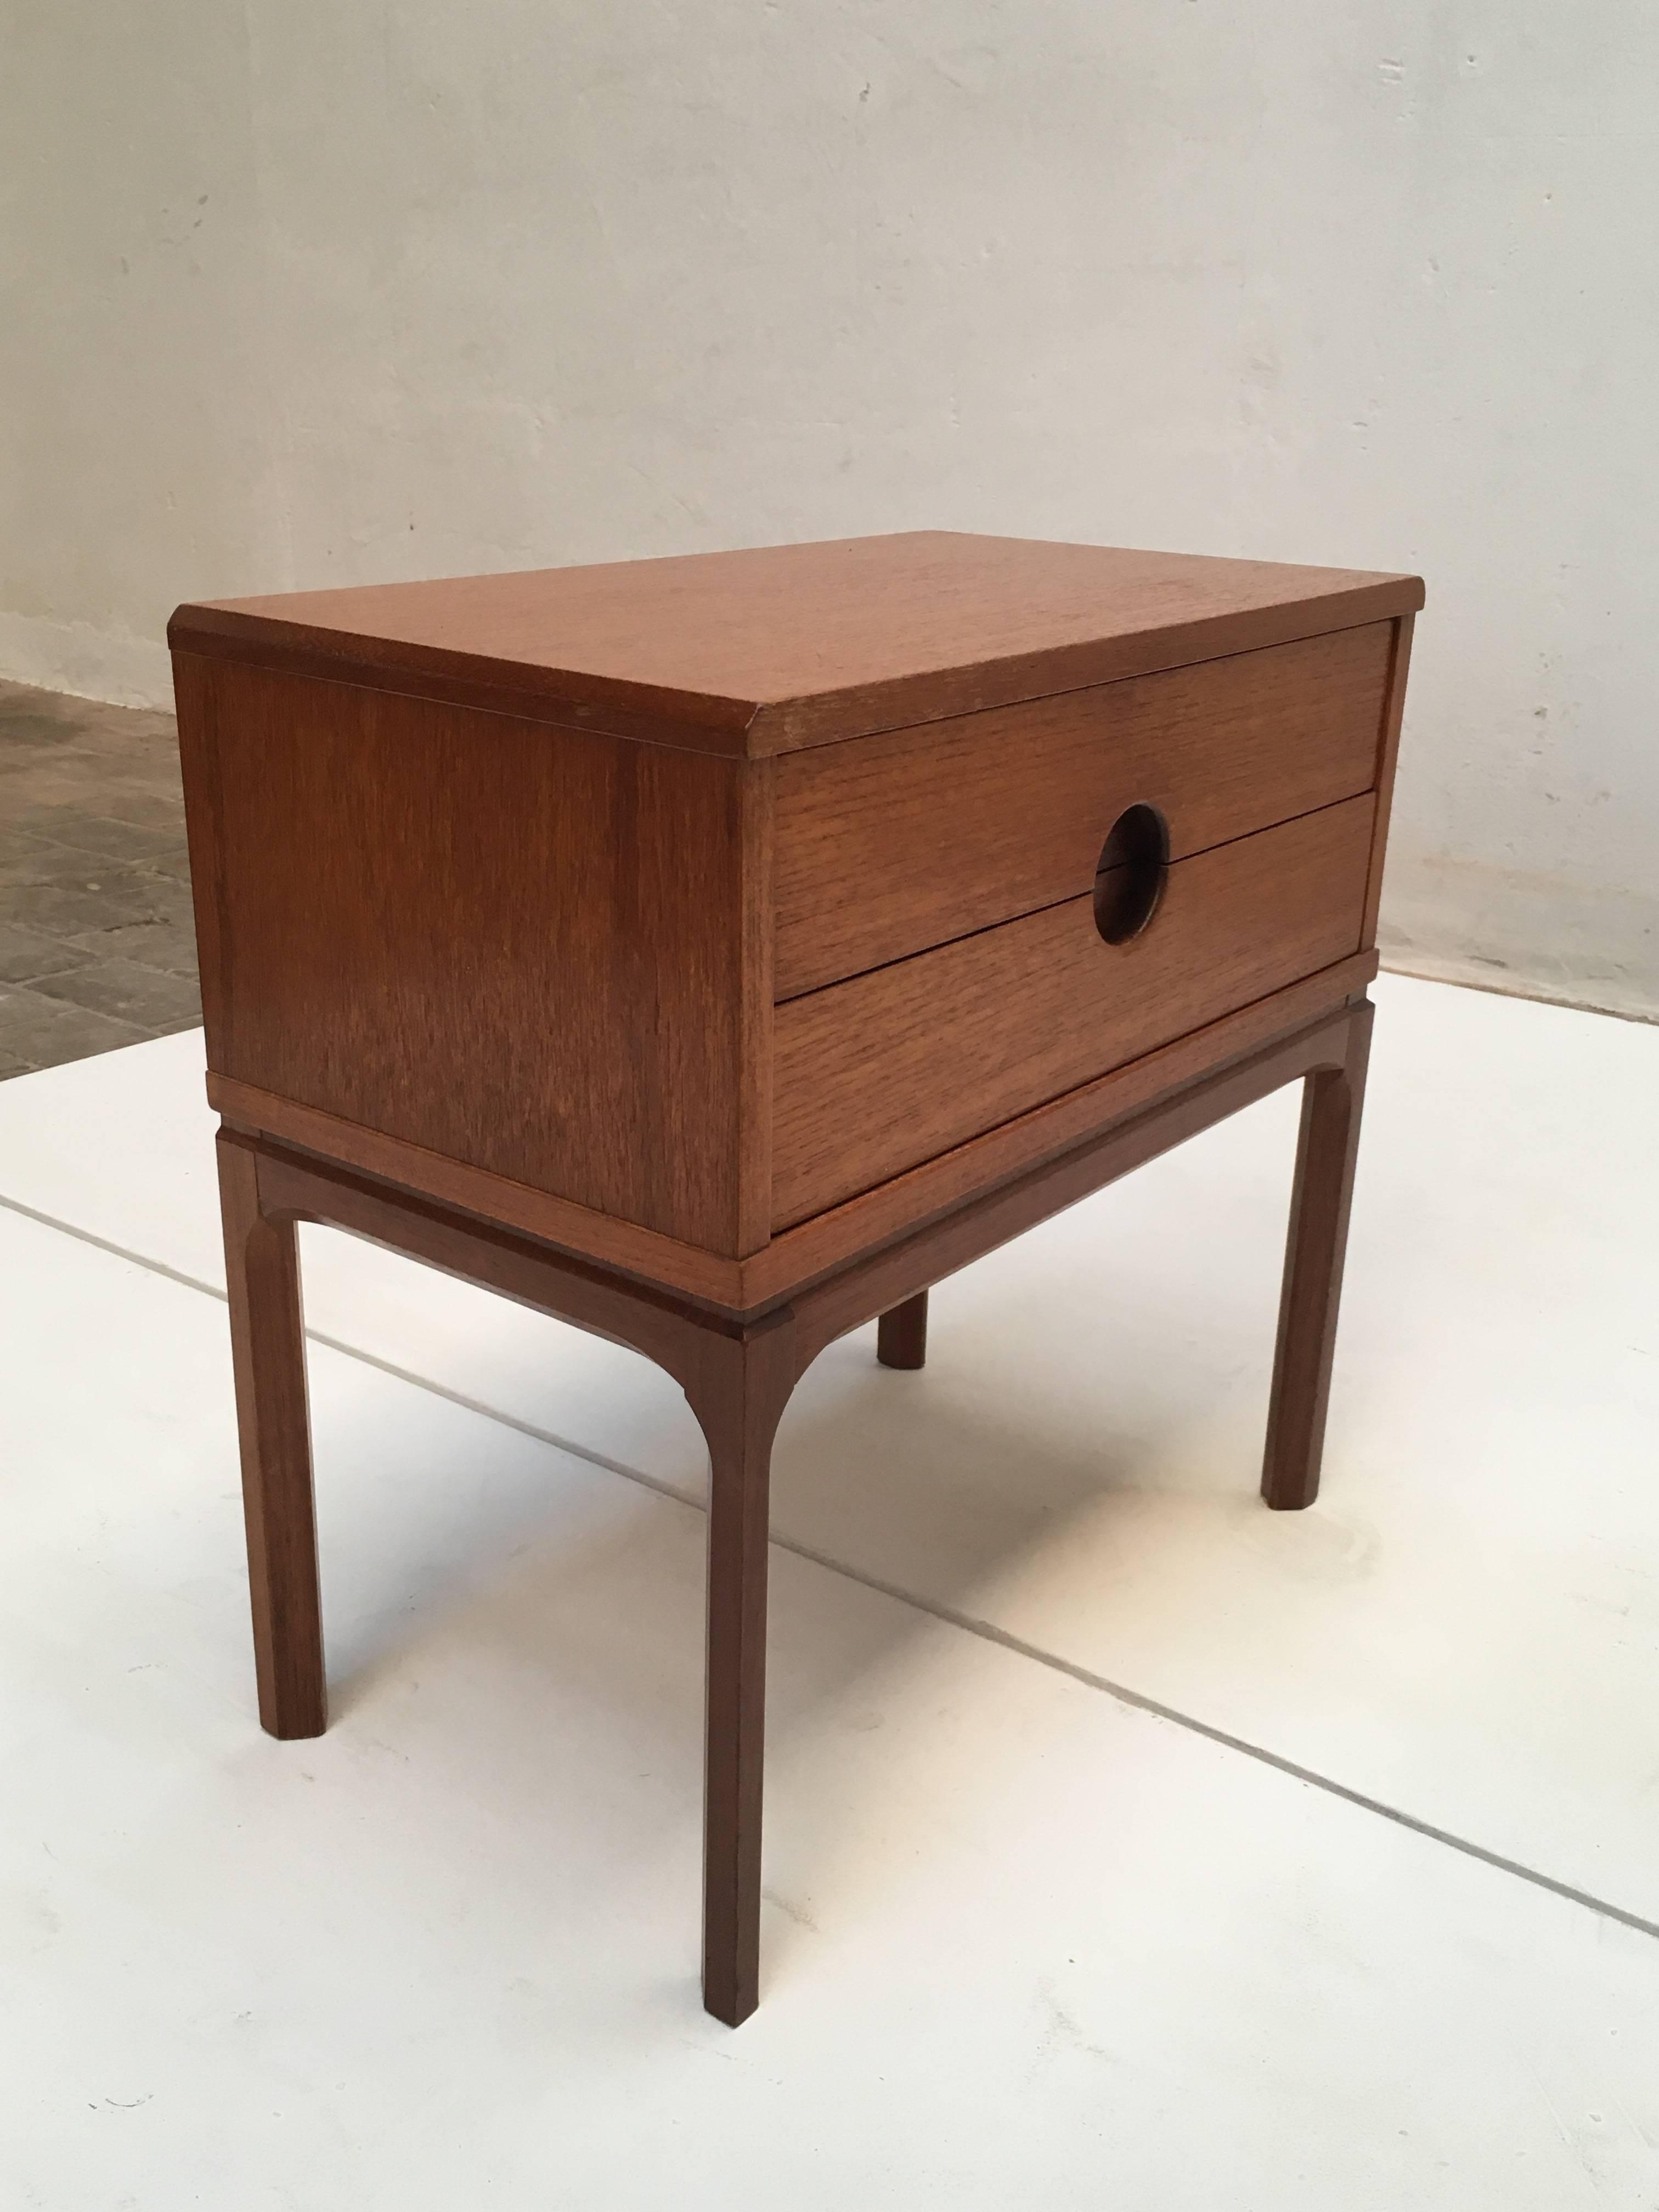 Pair of top quality Danish design nightstands by cabinetmaker Aksel Kjersgaard 
produced by Odder, Denmark, circa 1960.

One cabinet has two drawers and the other two doors.

They can be perfectly used as nightstands or side tables that will